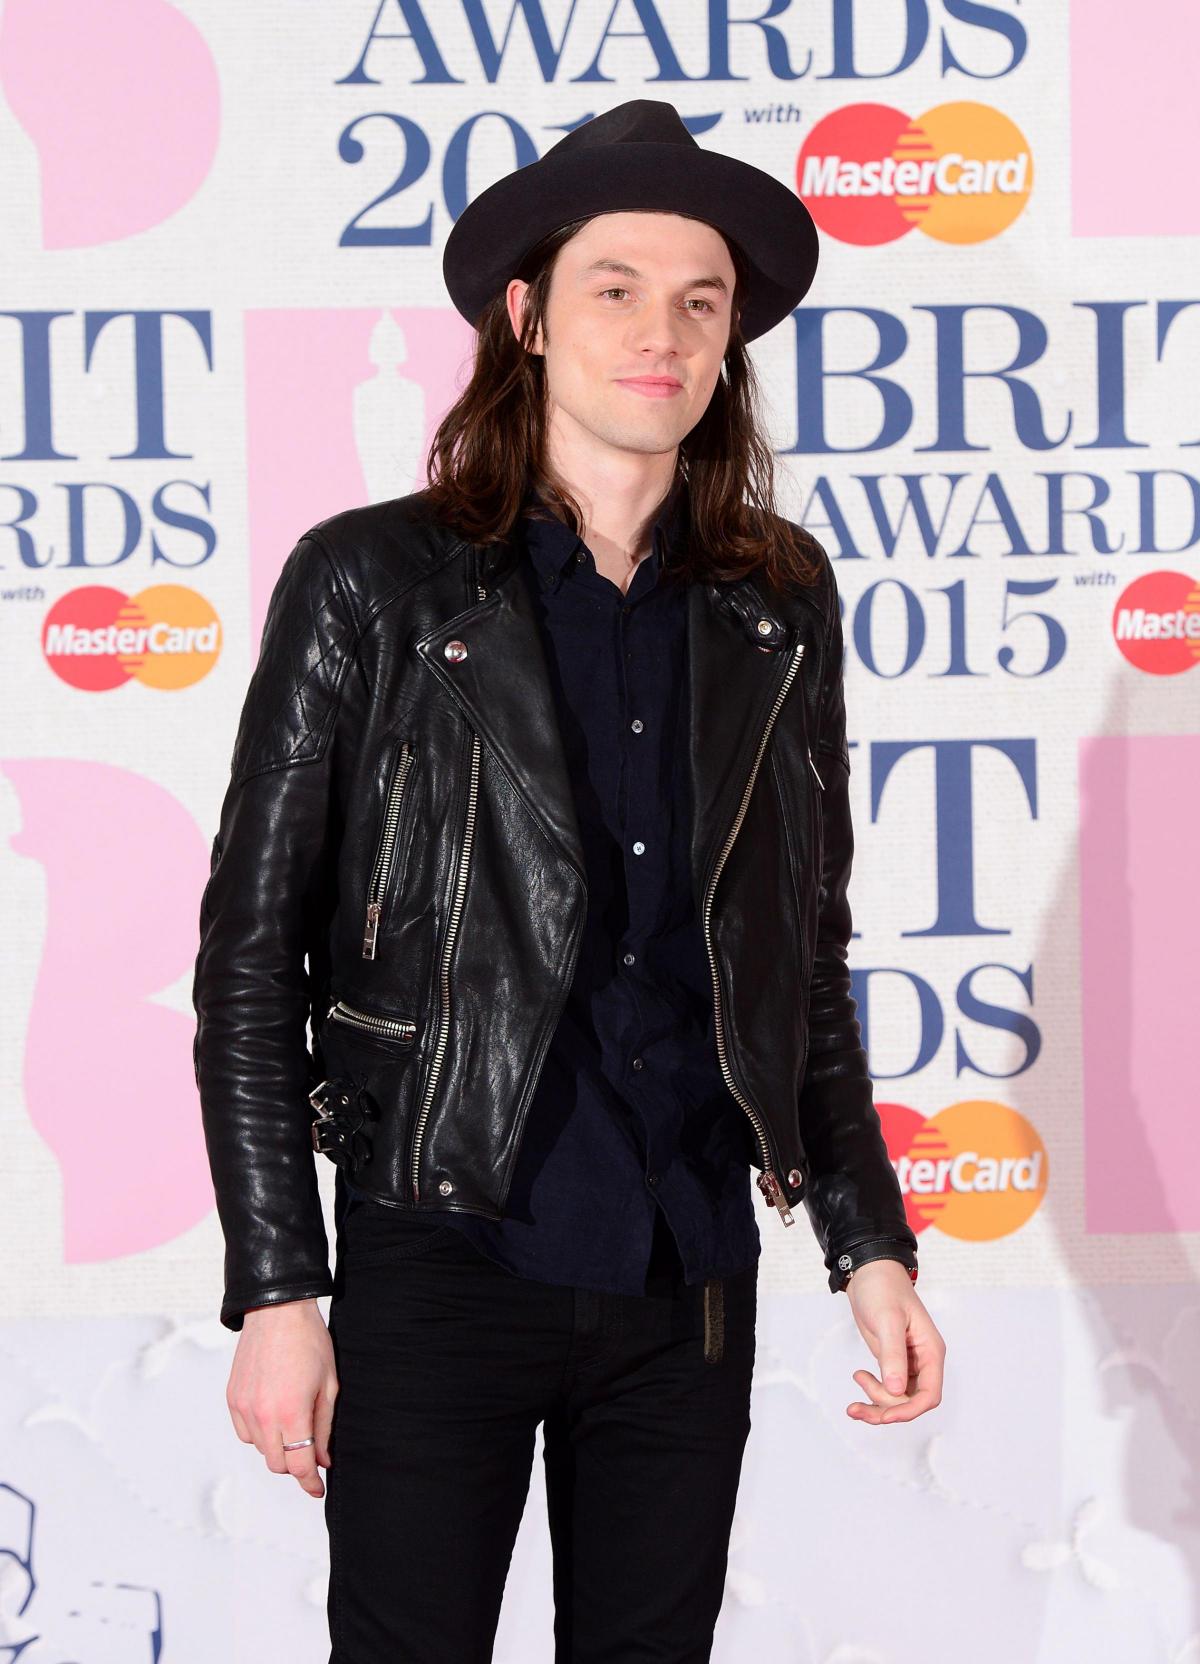 James Bay - Isle of Wight Festival 2015 Line-up